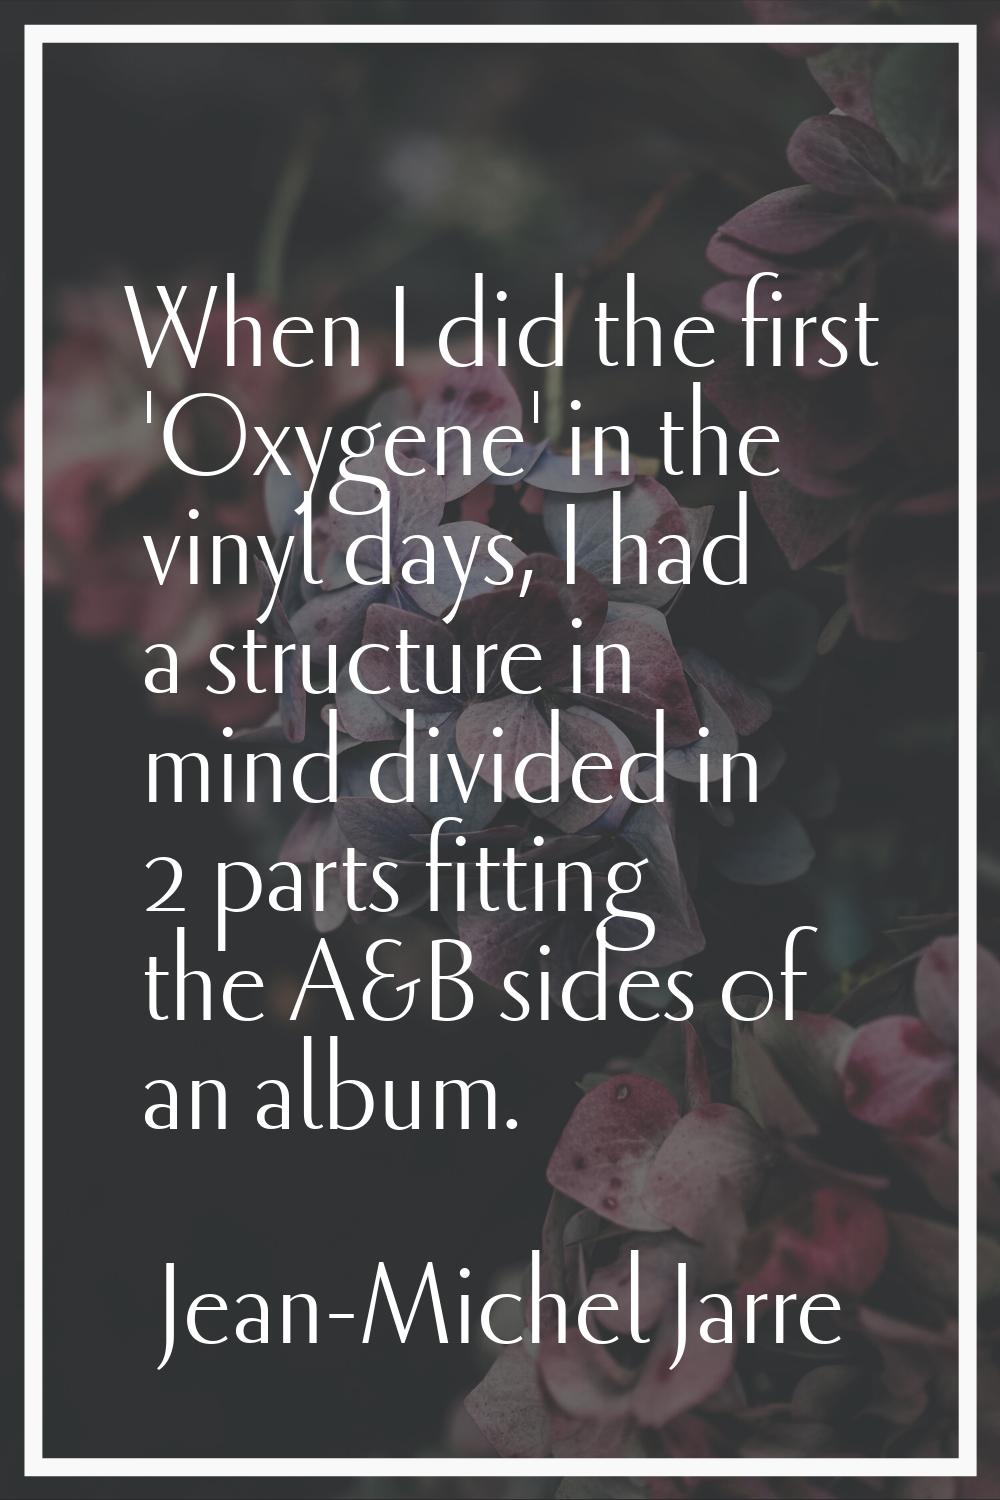 When I did the first 'Oxygene' in the vinyl days, I had a structure in mind divided in 2 parts fitt